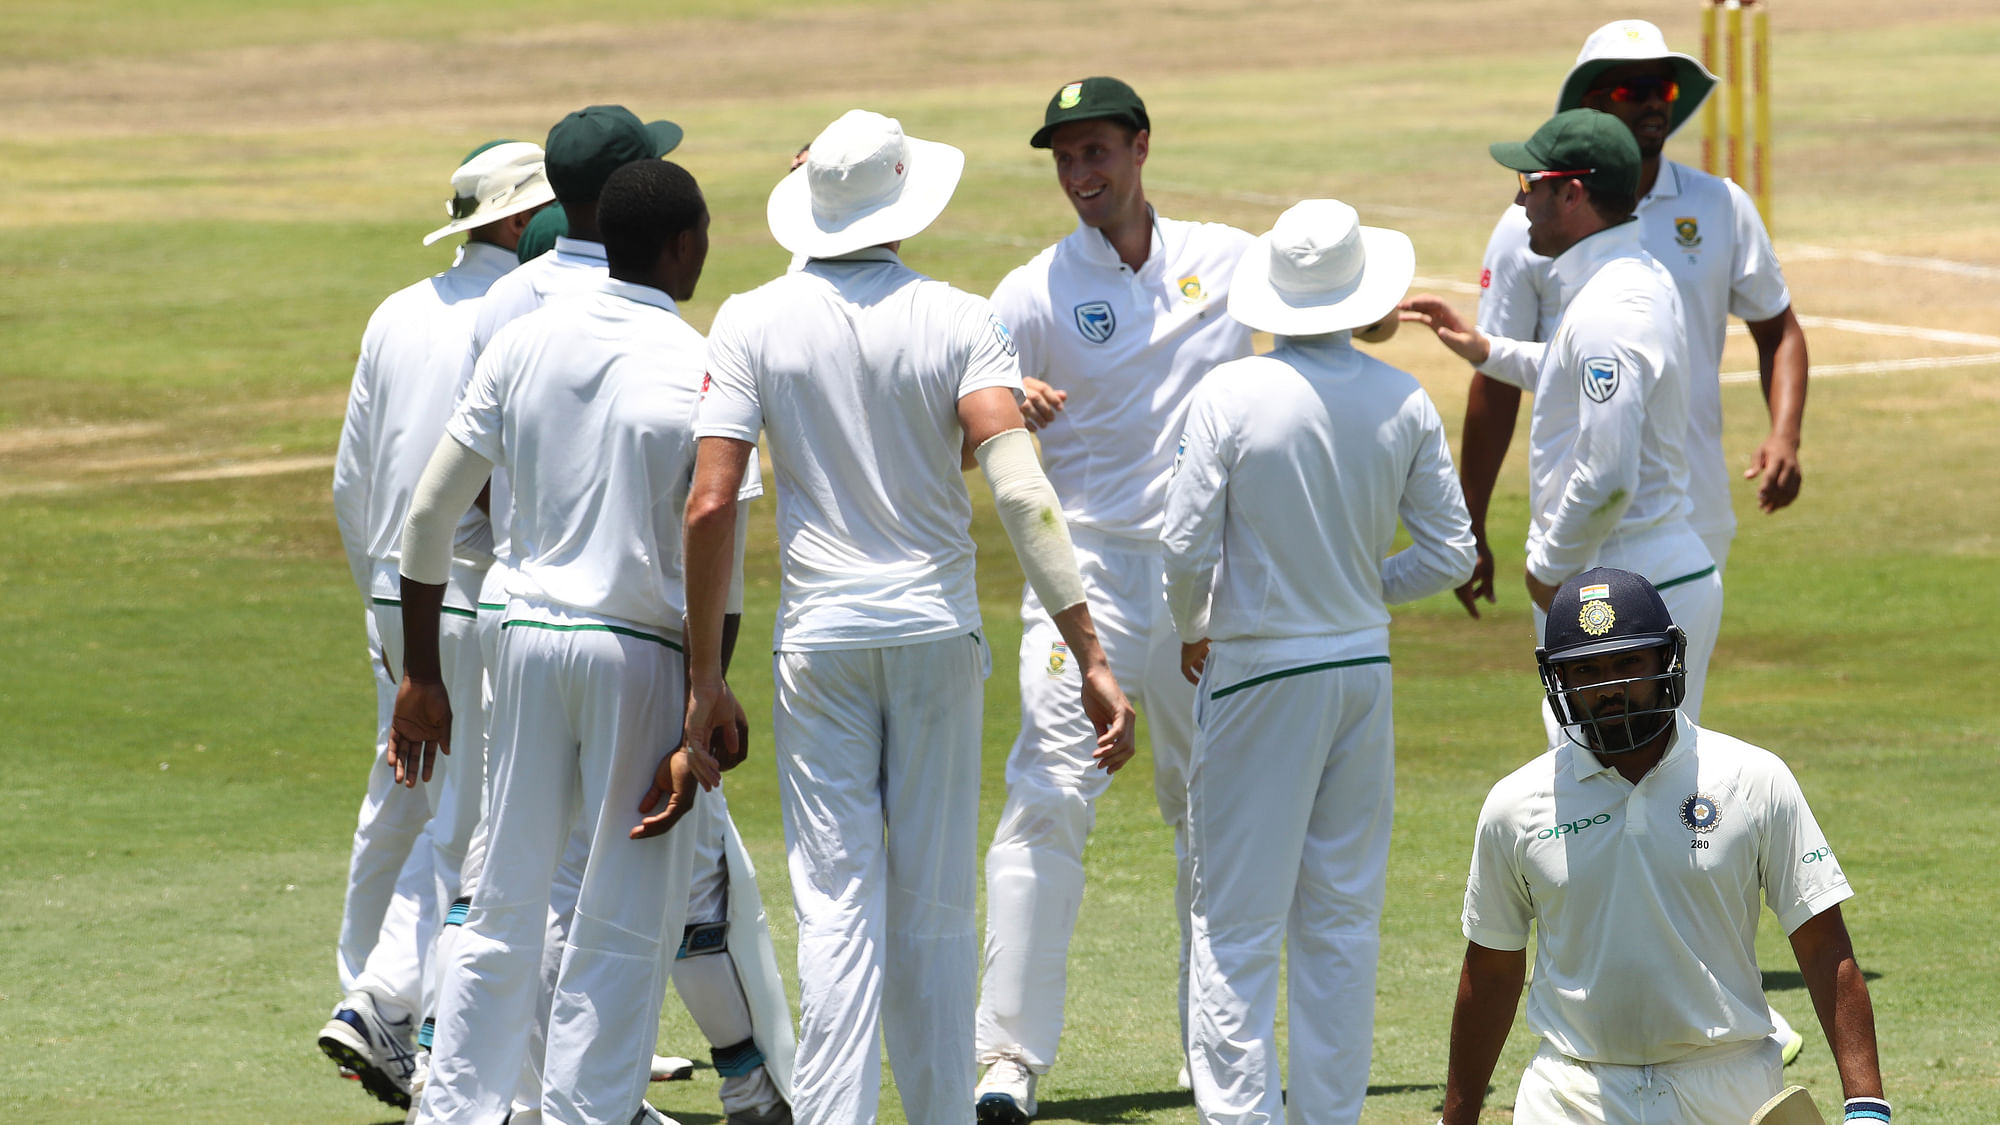 South Africa beat India by 135 runs in Centurion.